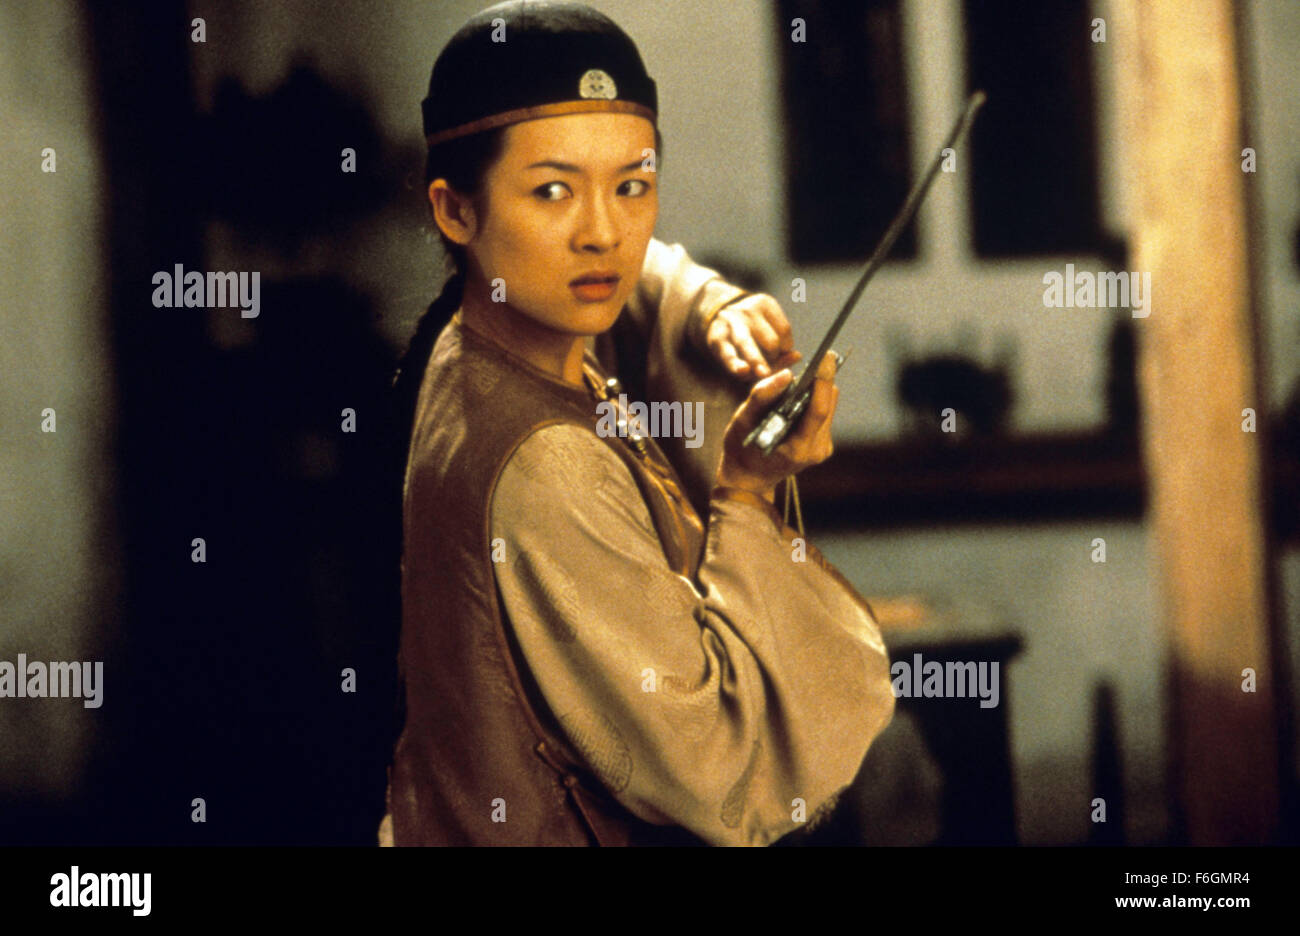 RELEASE DATE: December 22, 2000. MOVIE TITLE: Crouching Tiger Hidden Dragon. STUDIO: United China Vision. PLOT: The disappearance of a magical jade sword spurs a breathtaking quest for the missing treasure. Li is embittered by the loss of his jade sword, and his unrequited pursuit of Yu is further complicated by the mysterious intrusion of an assassin. The identity of the assassin is gradually unveiled as another poignant tale of love begins to ravel with that of Li and Yu against the backdrop of Western China's magnificent landscape. PICTURED: ZIYI ZHANG as Jen Yu. Stock Photo